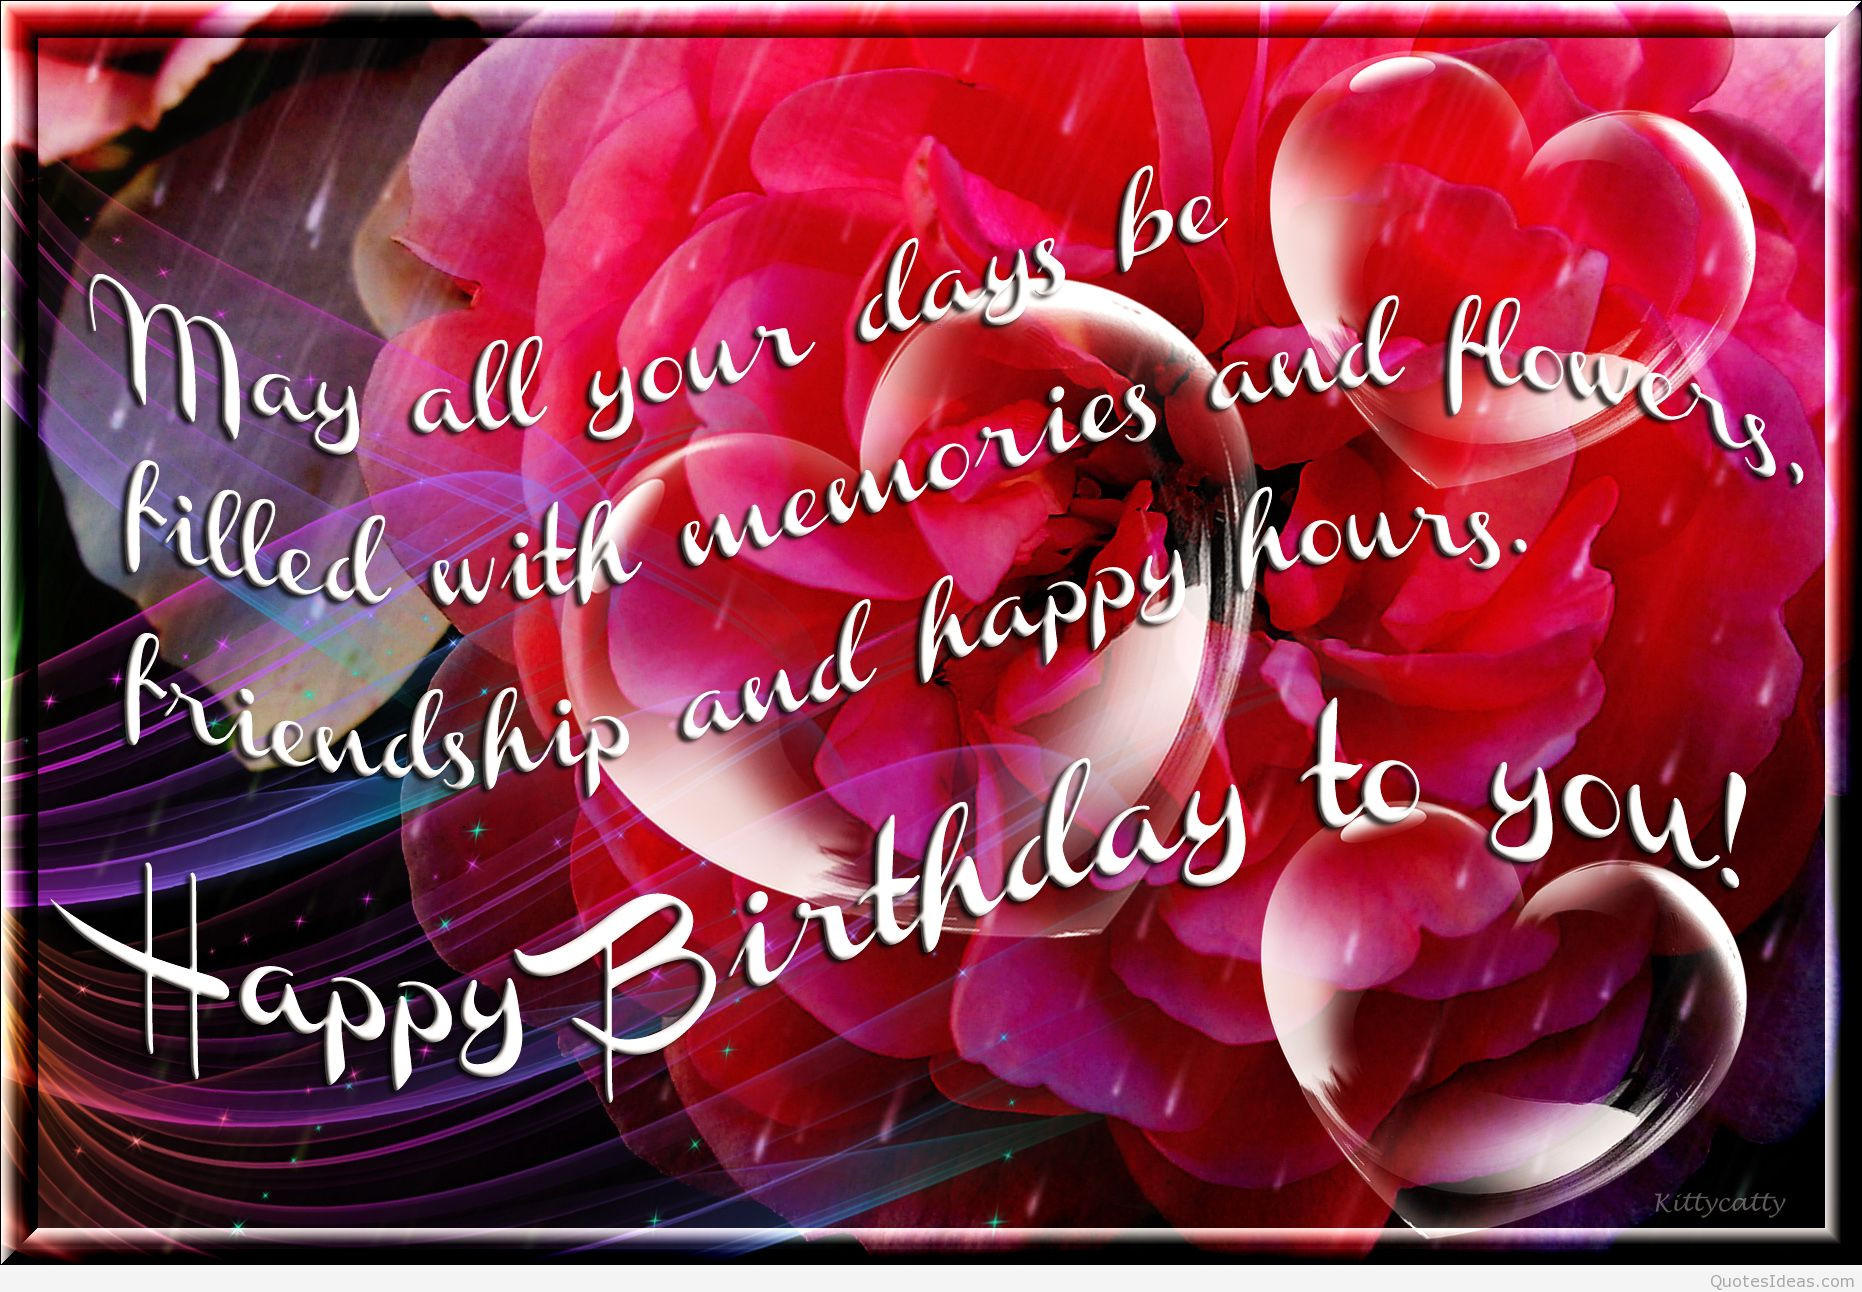 Birthday Images With Quotes
 Happy birthday sister with quotes wishes